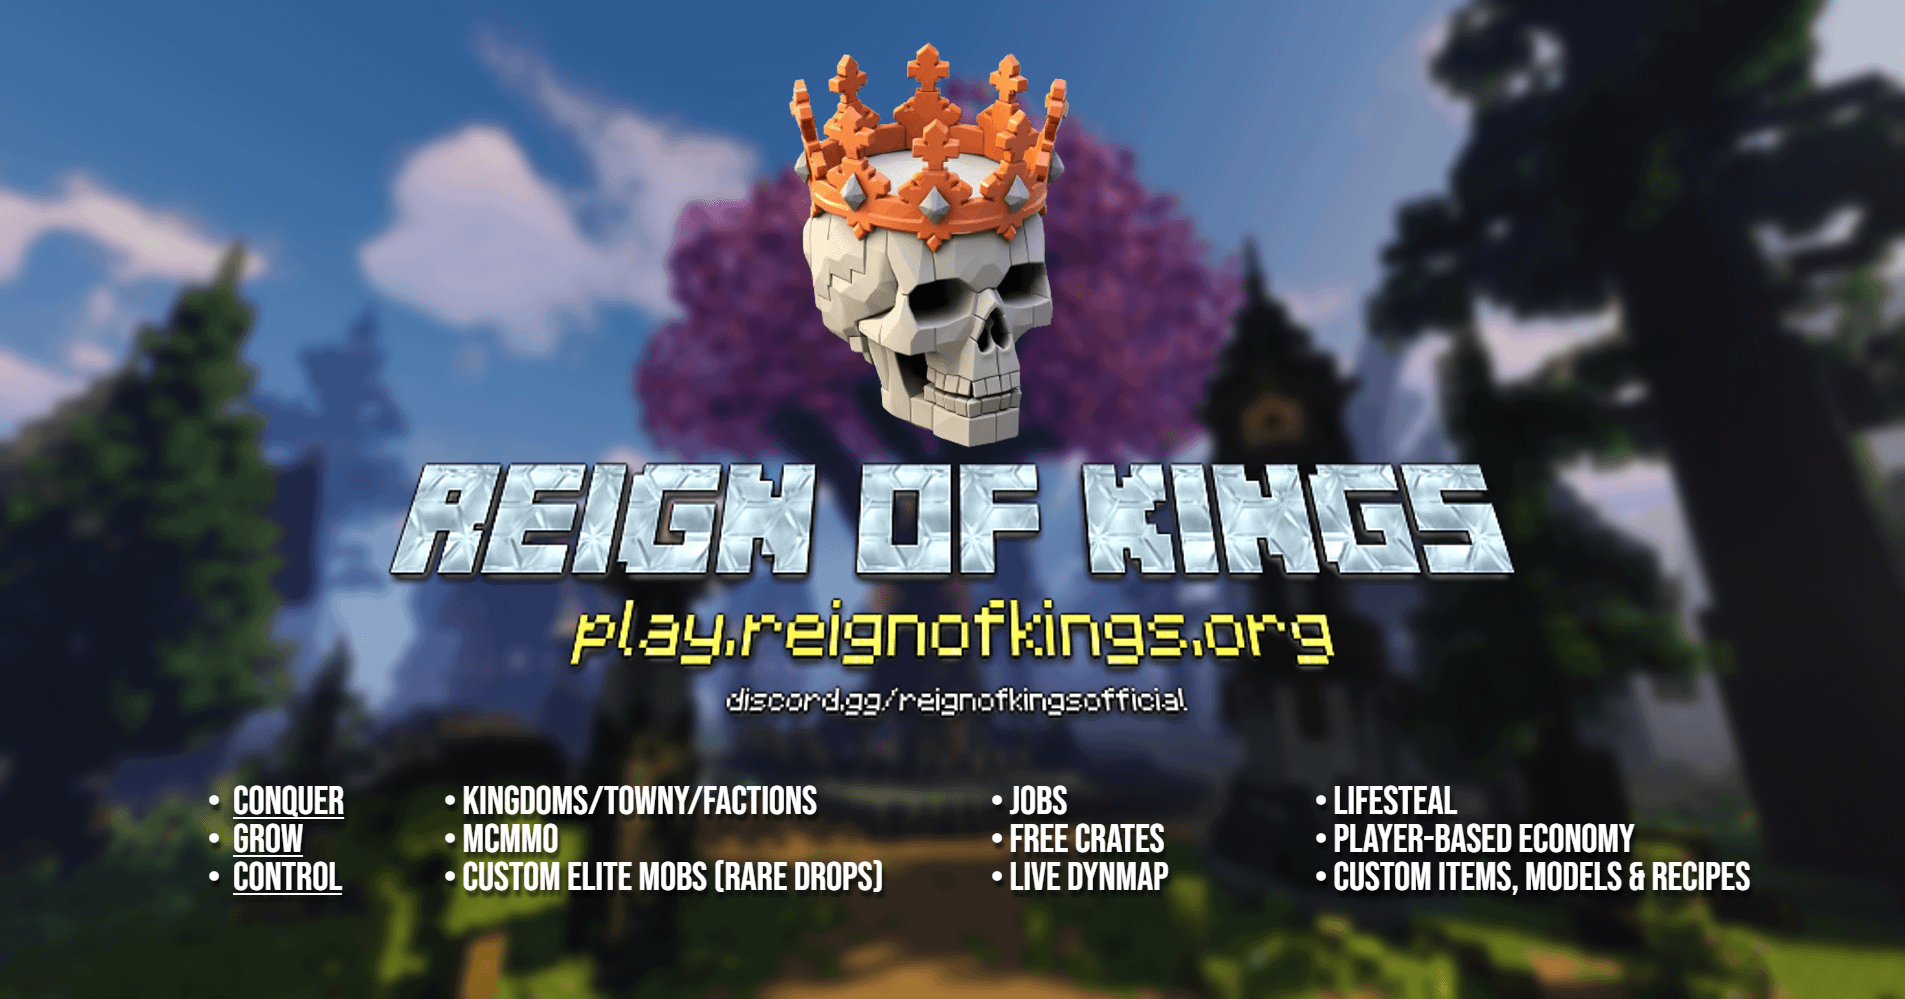 Minecraft Memes - "Unleash the Chaos: Reign of Kings SMP"